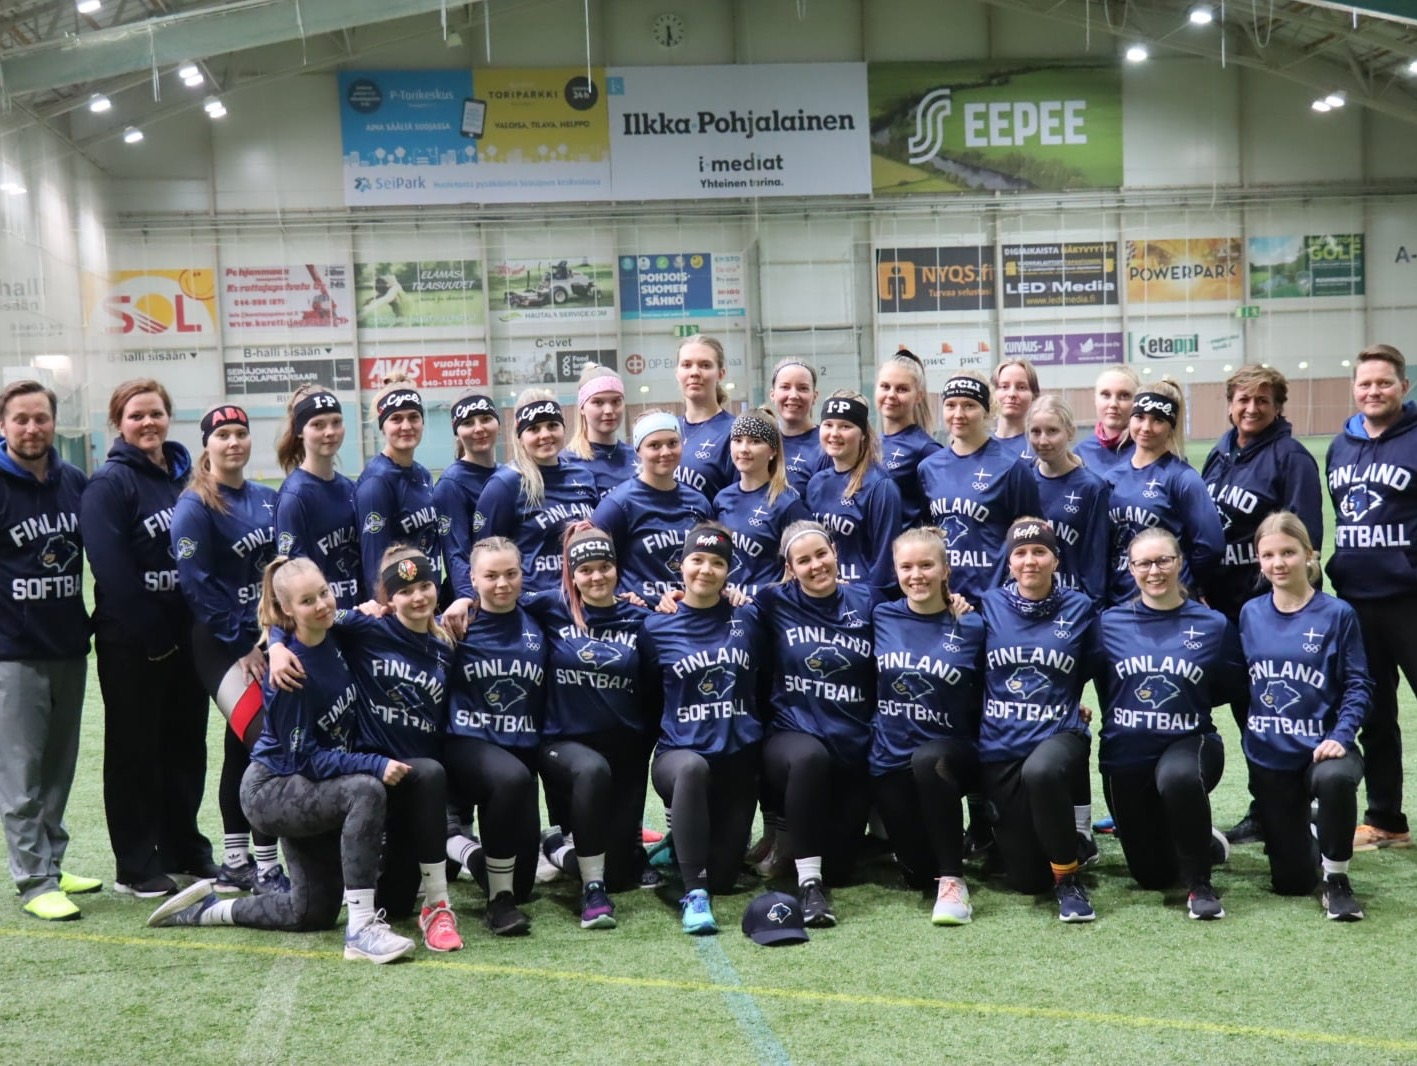 Finland has launched a women's softball team ©Finland Olympic Committee/Jukka Marttala